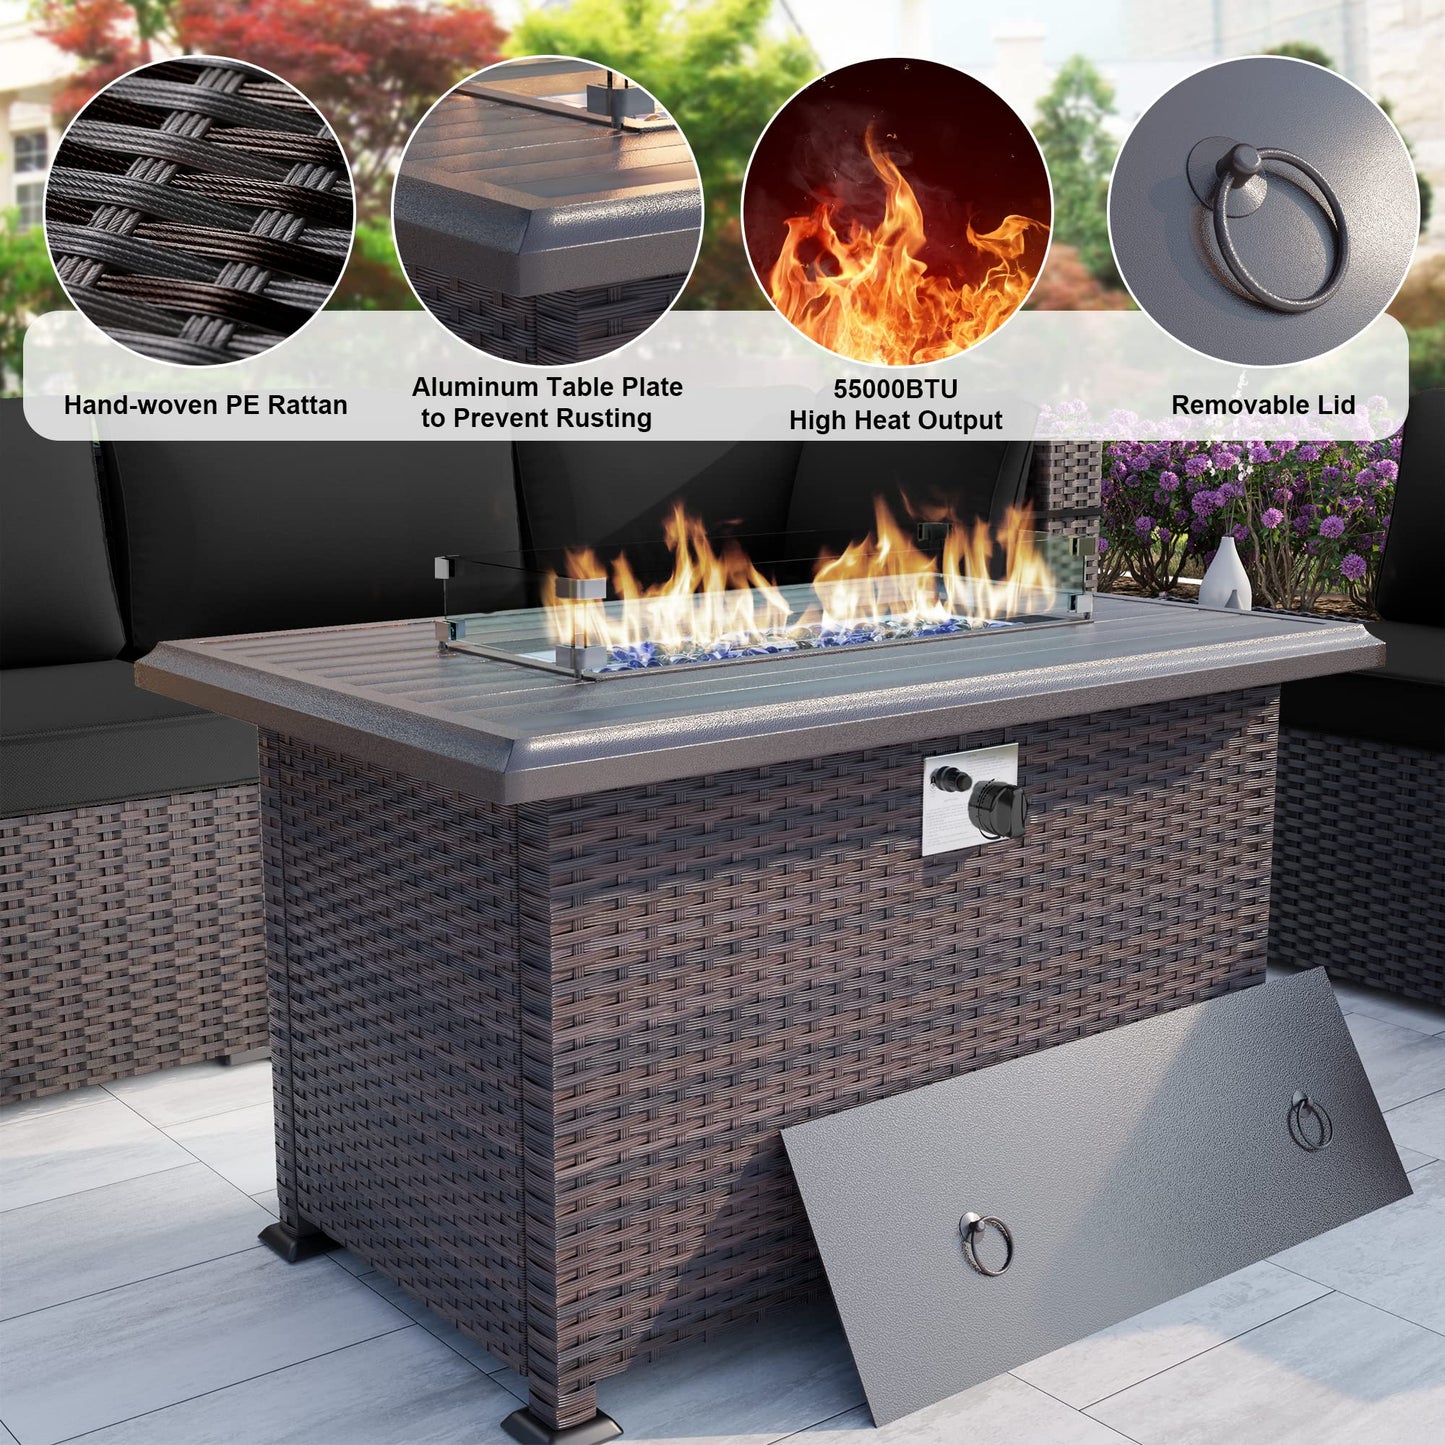 ALAULM 7 Pieces Outdoor Patio Furniture Set with Propane Fire Pit Table Patio Sectional Sofa Sets - Black